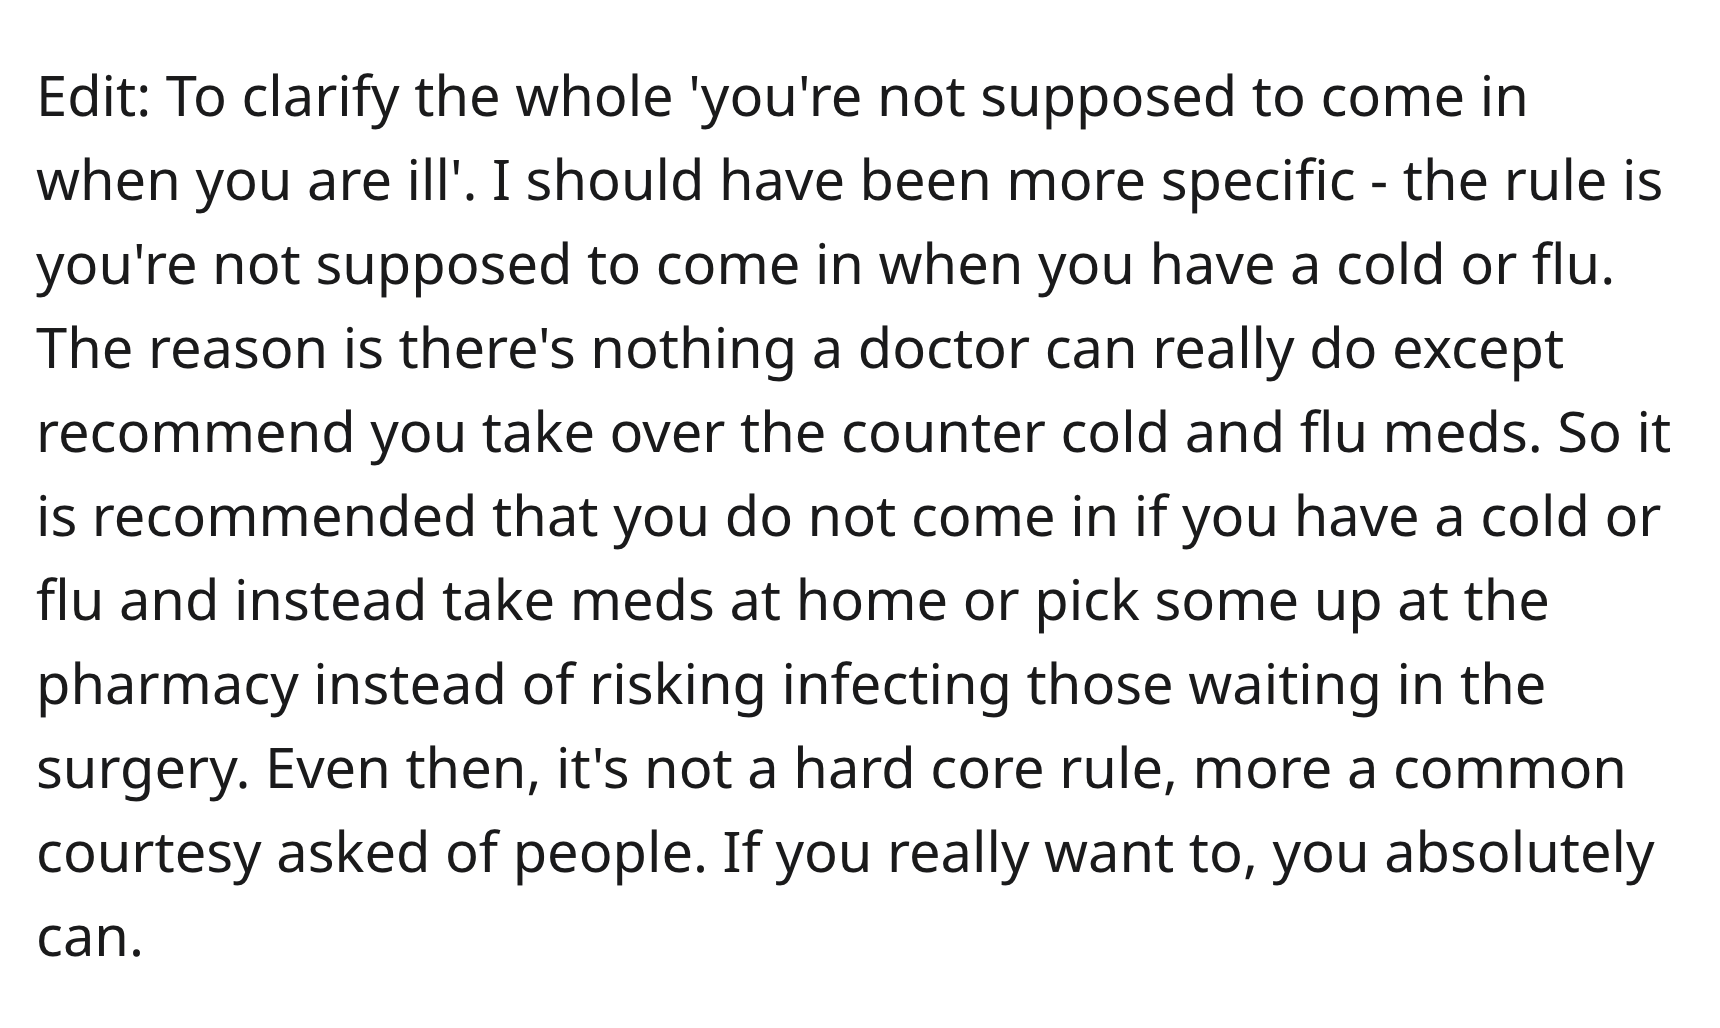 Boss Illegally Demands Doctor’s Note, So Doctor Recommends 2 Weeks Off - angle - Edit To clarify the whole 'you're not supposed to come in when you are ill'. I should have been more specific the rule is you're not supposed to come in when you have a cold